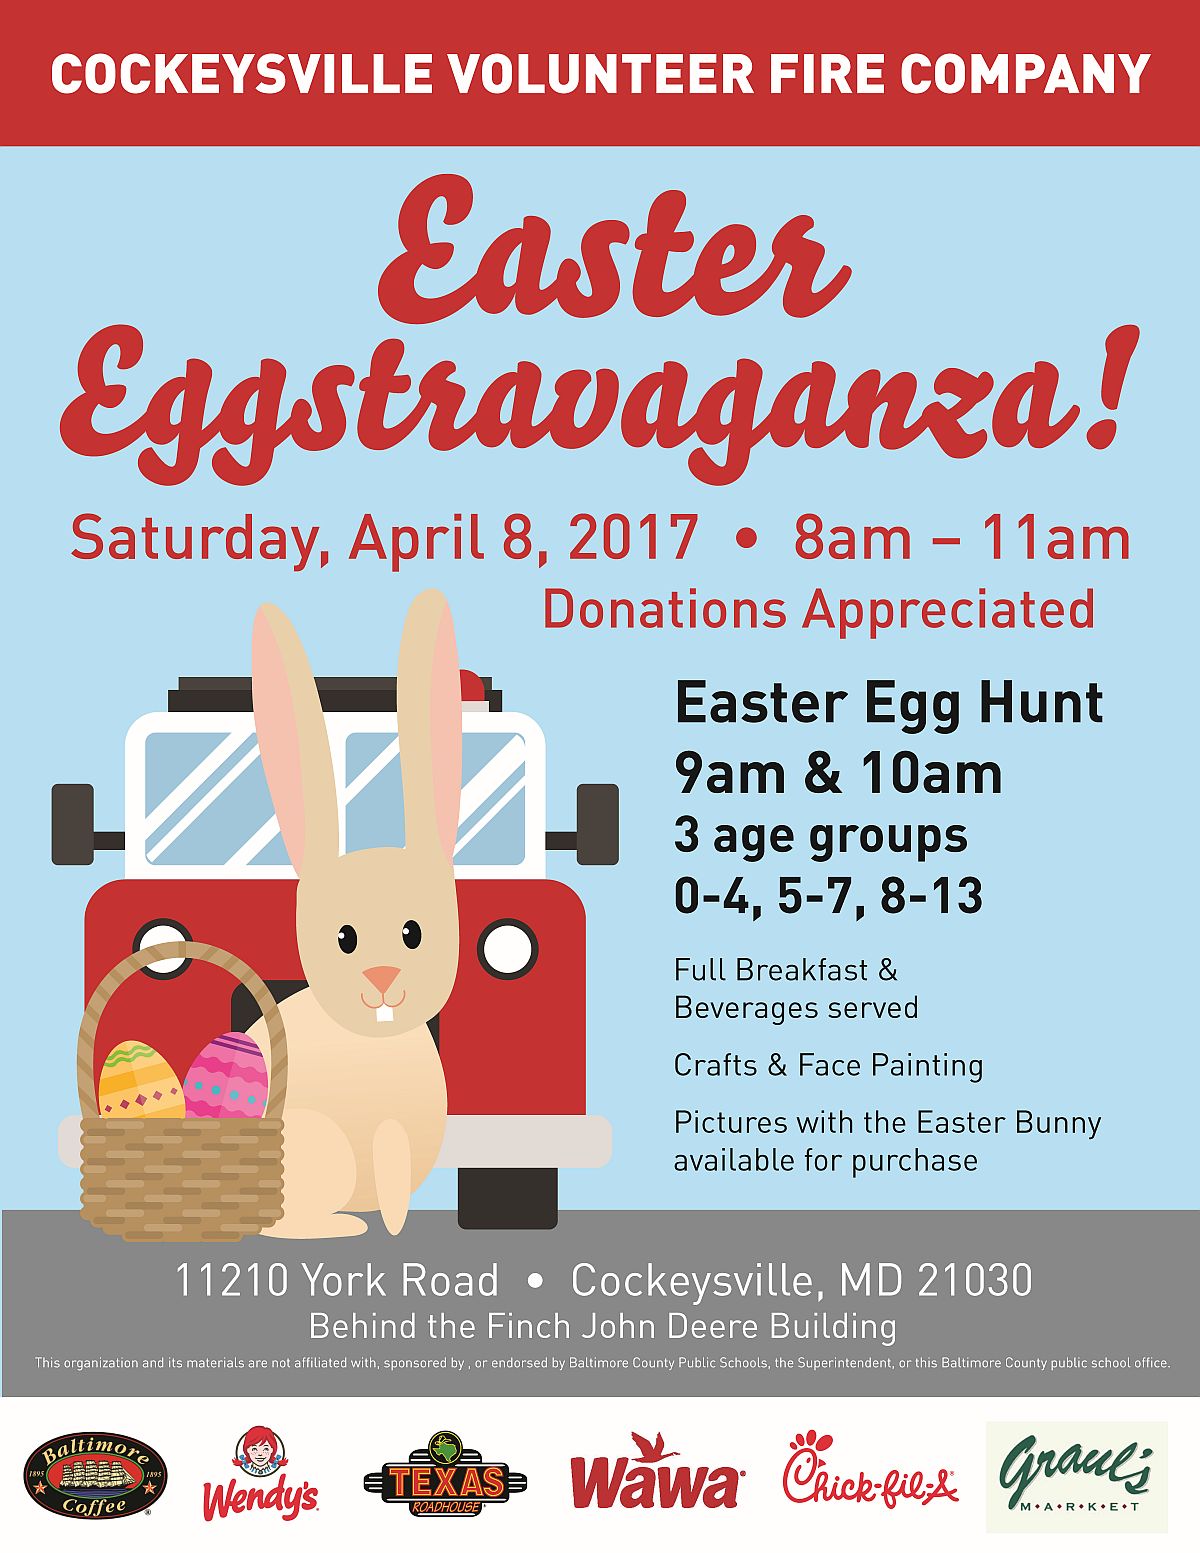 Breakfast with the Easter Bunny Returns to CVFC